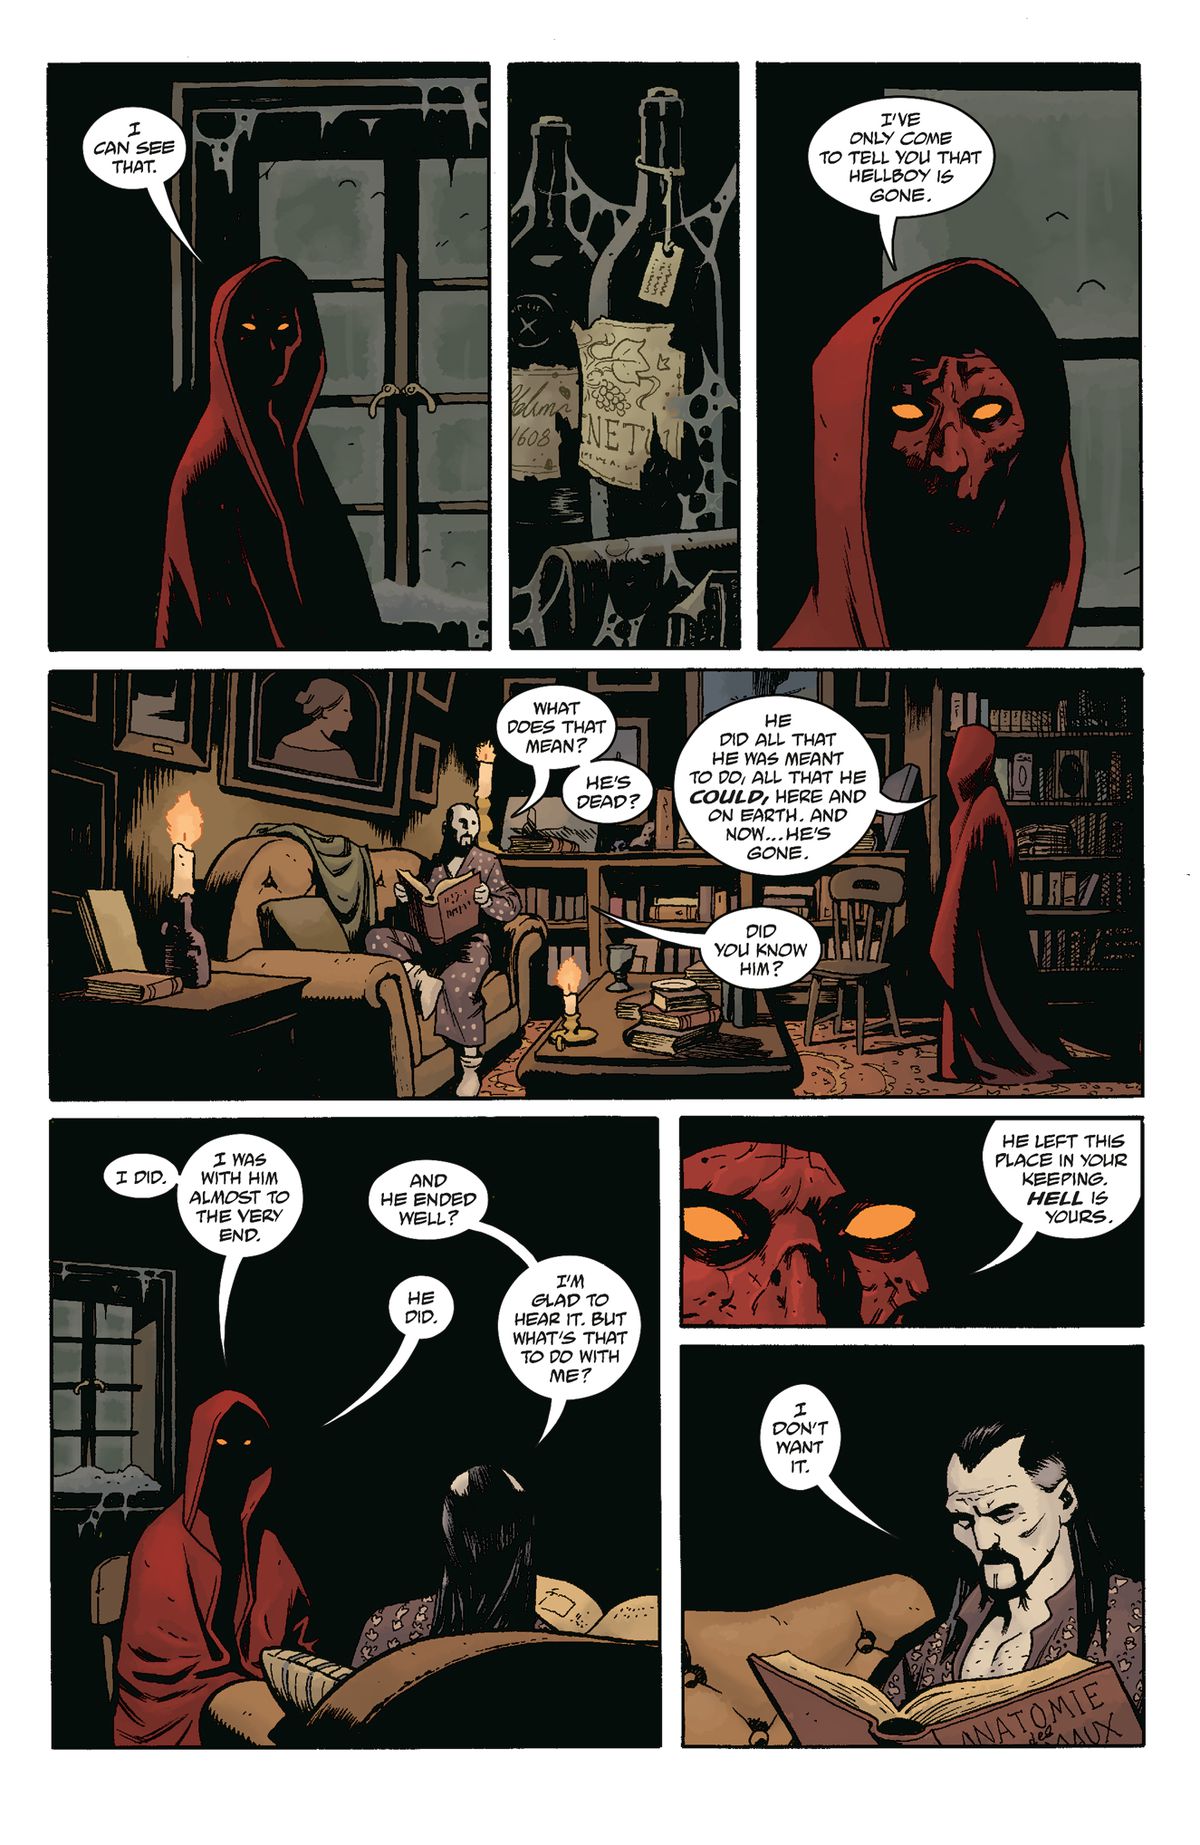 Koshchei and a “ghost” discuss his responsibilities as the ruler of Hell now that Hellboy is gone in Koshchei in Hell #1 (2022).